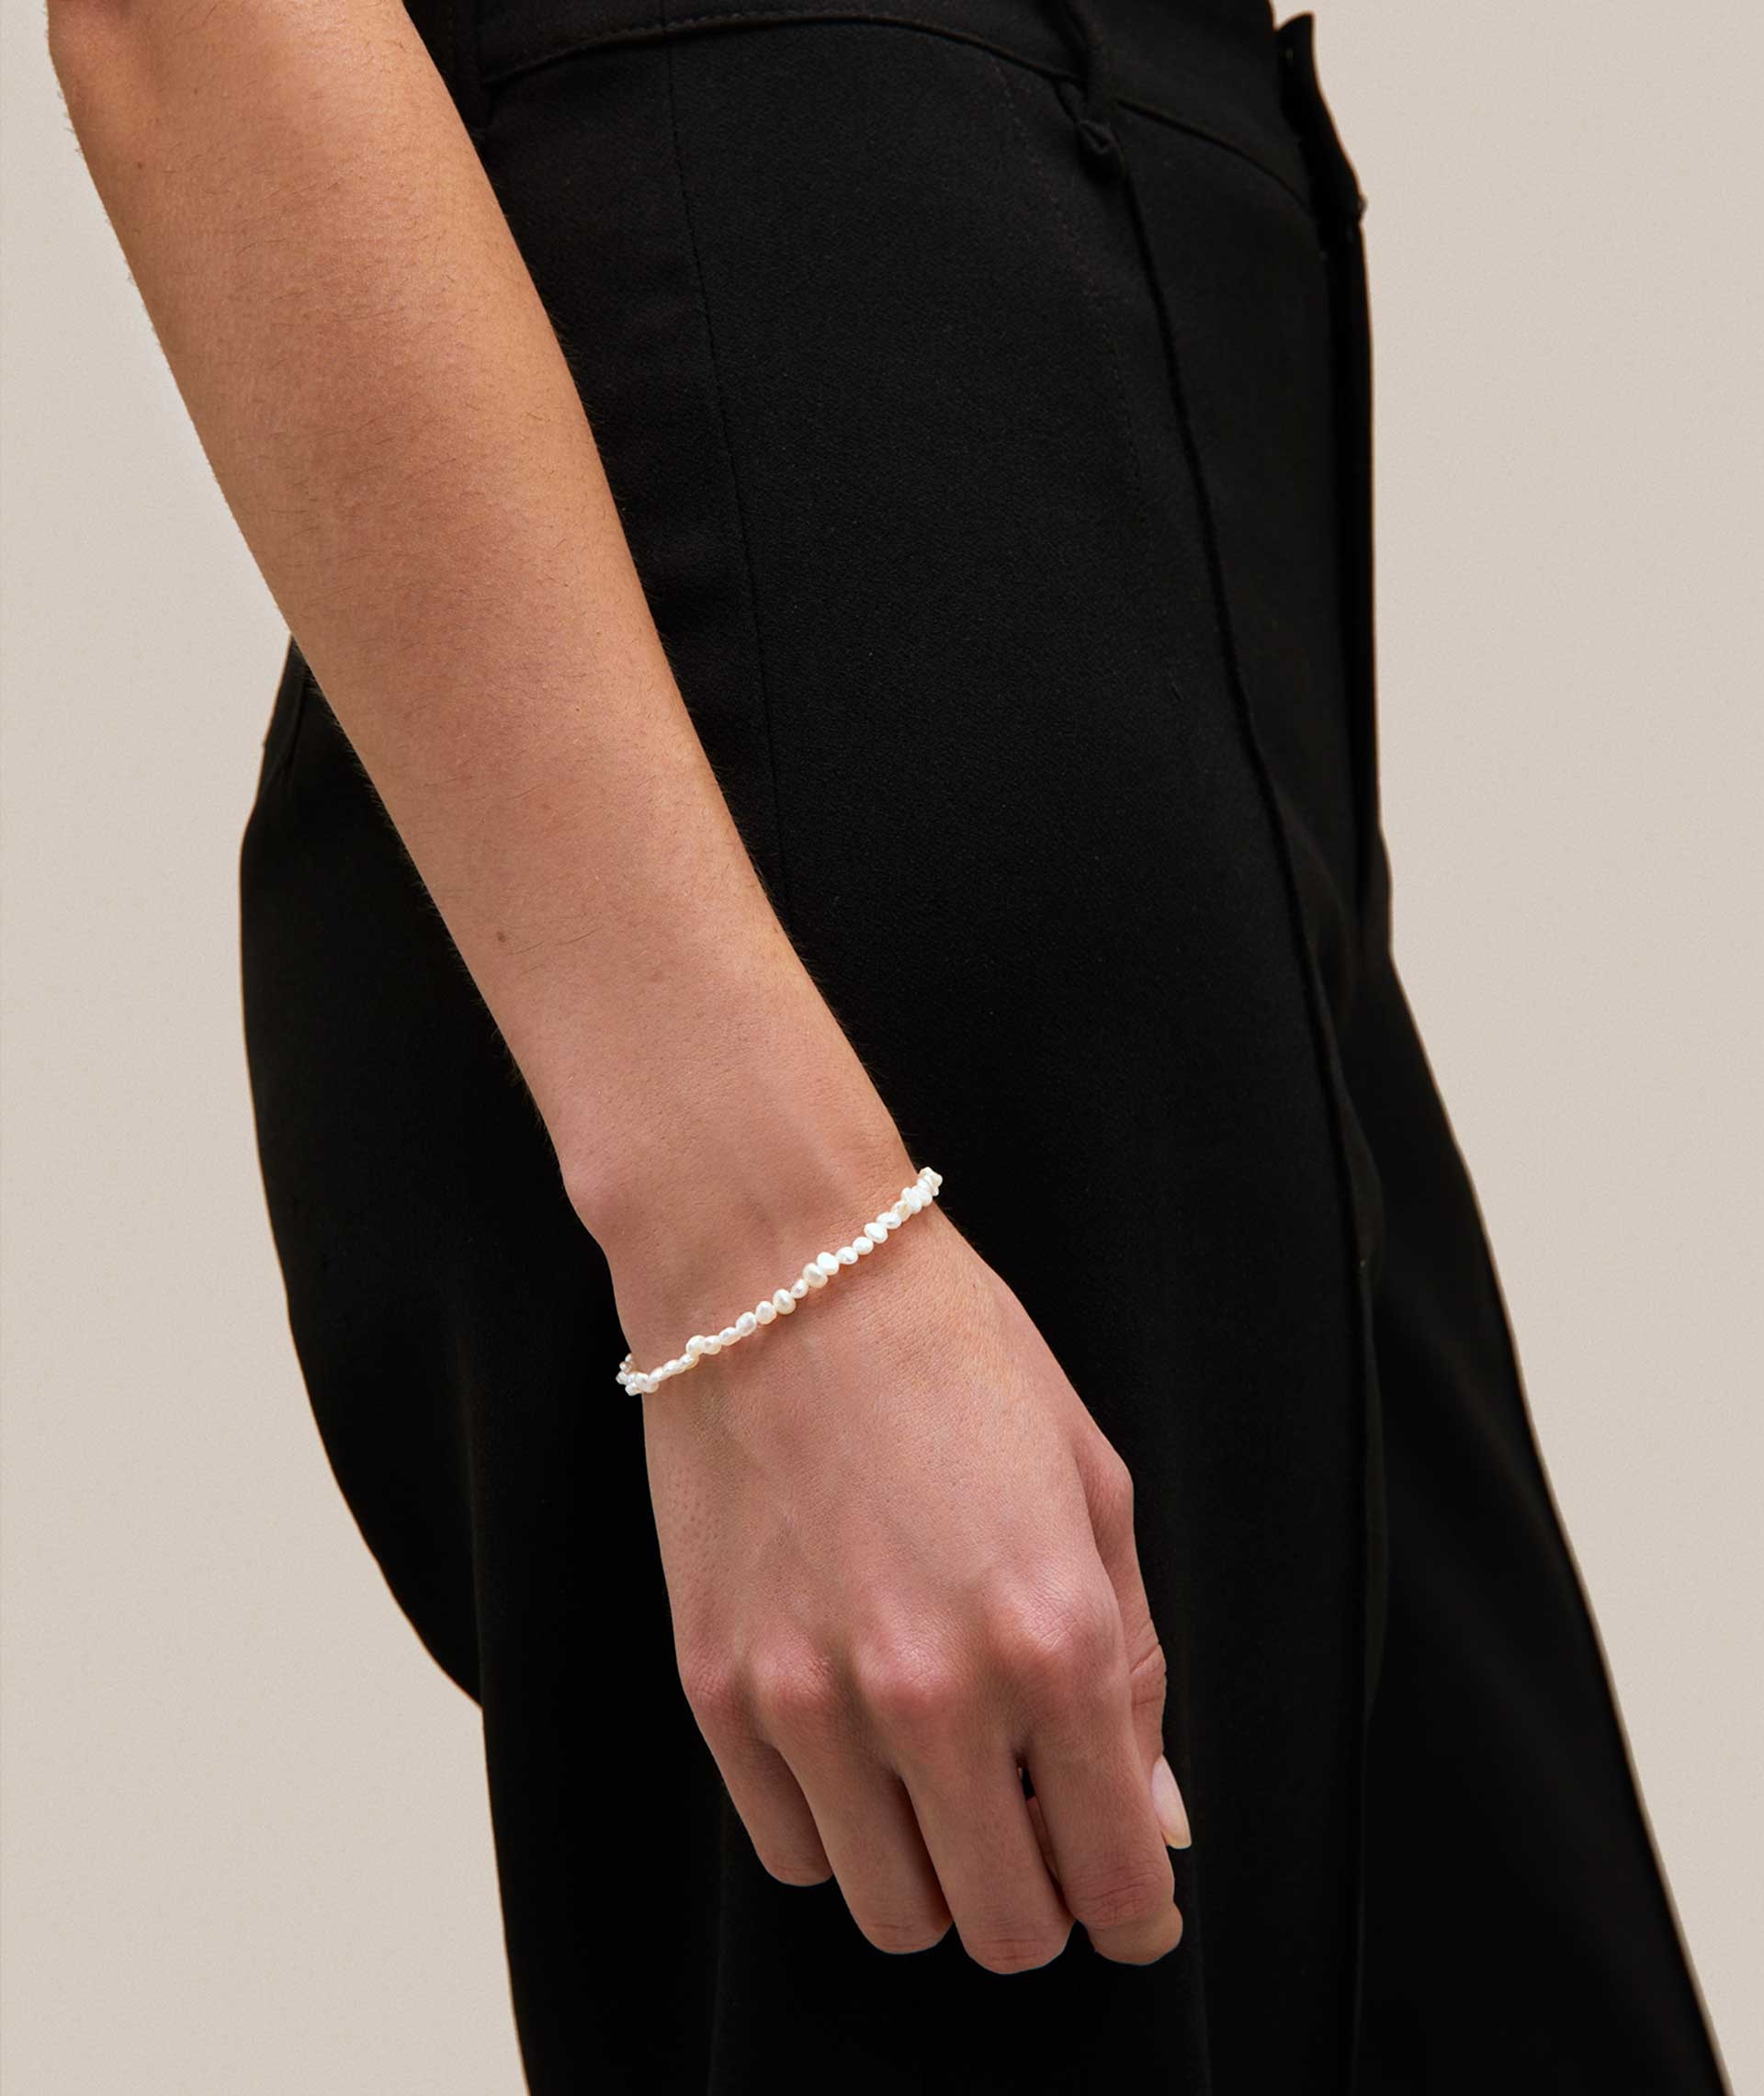 Marea Bracelet 18 Kt Gold Plated cultivated pearls